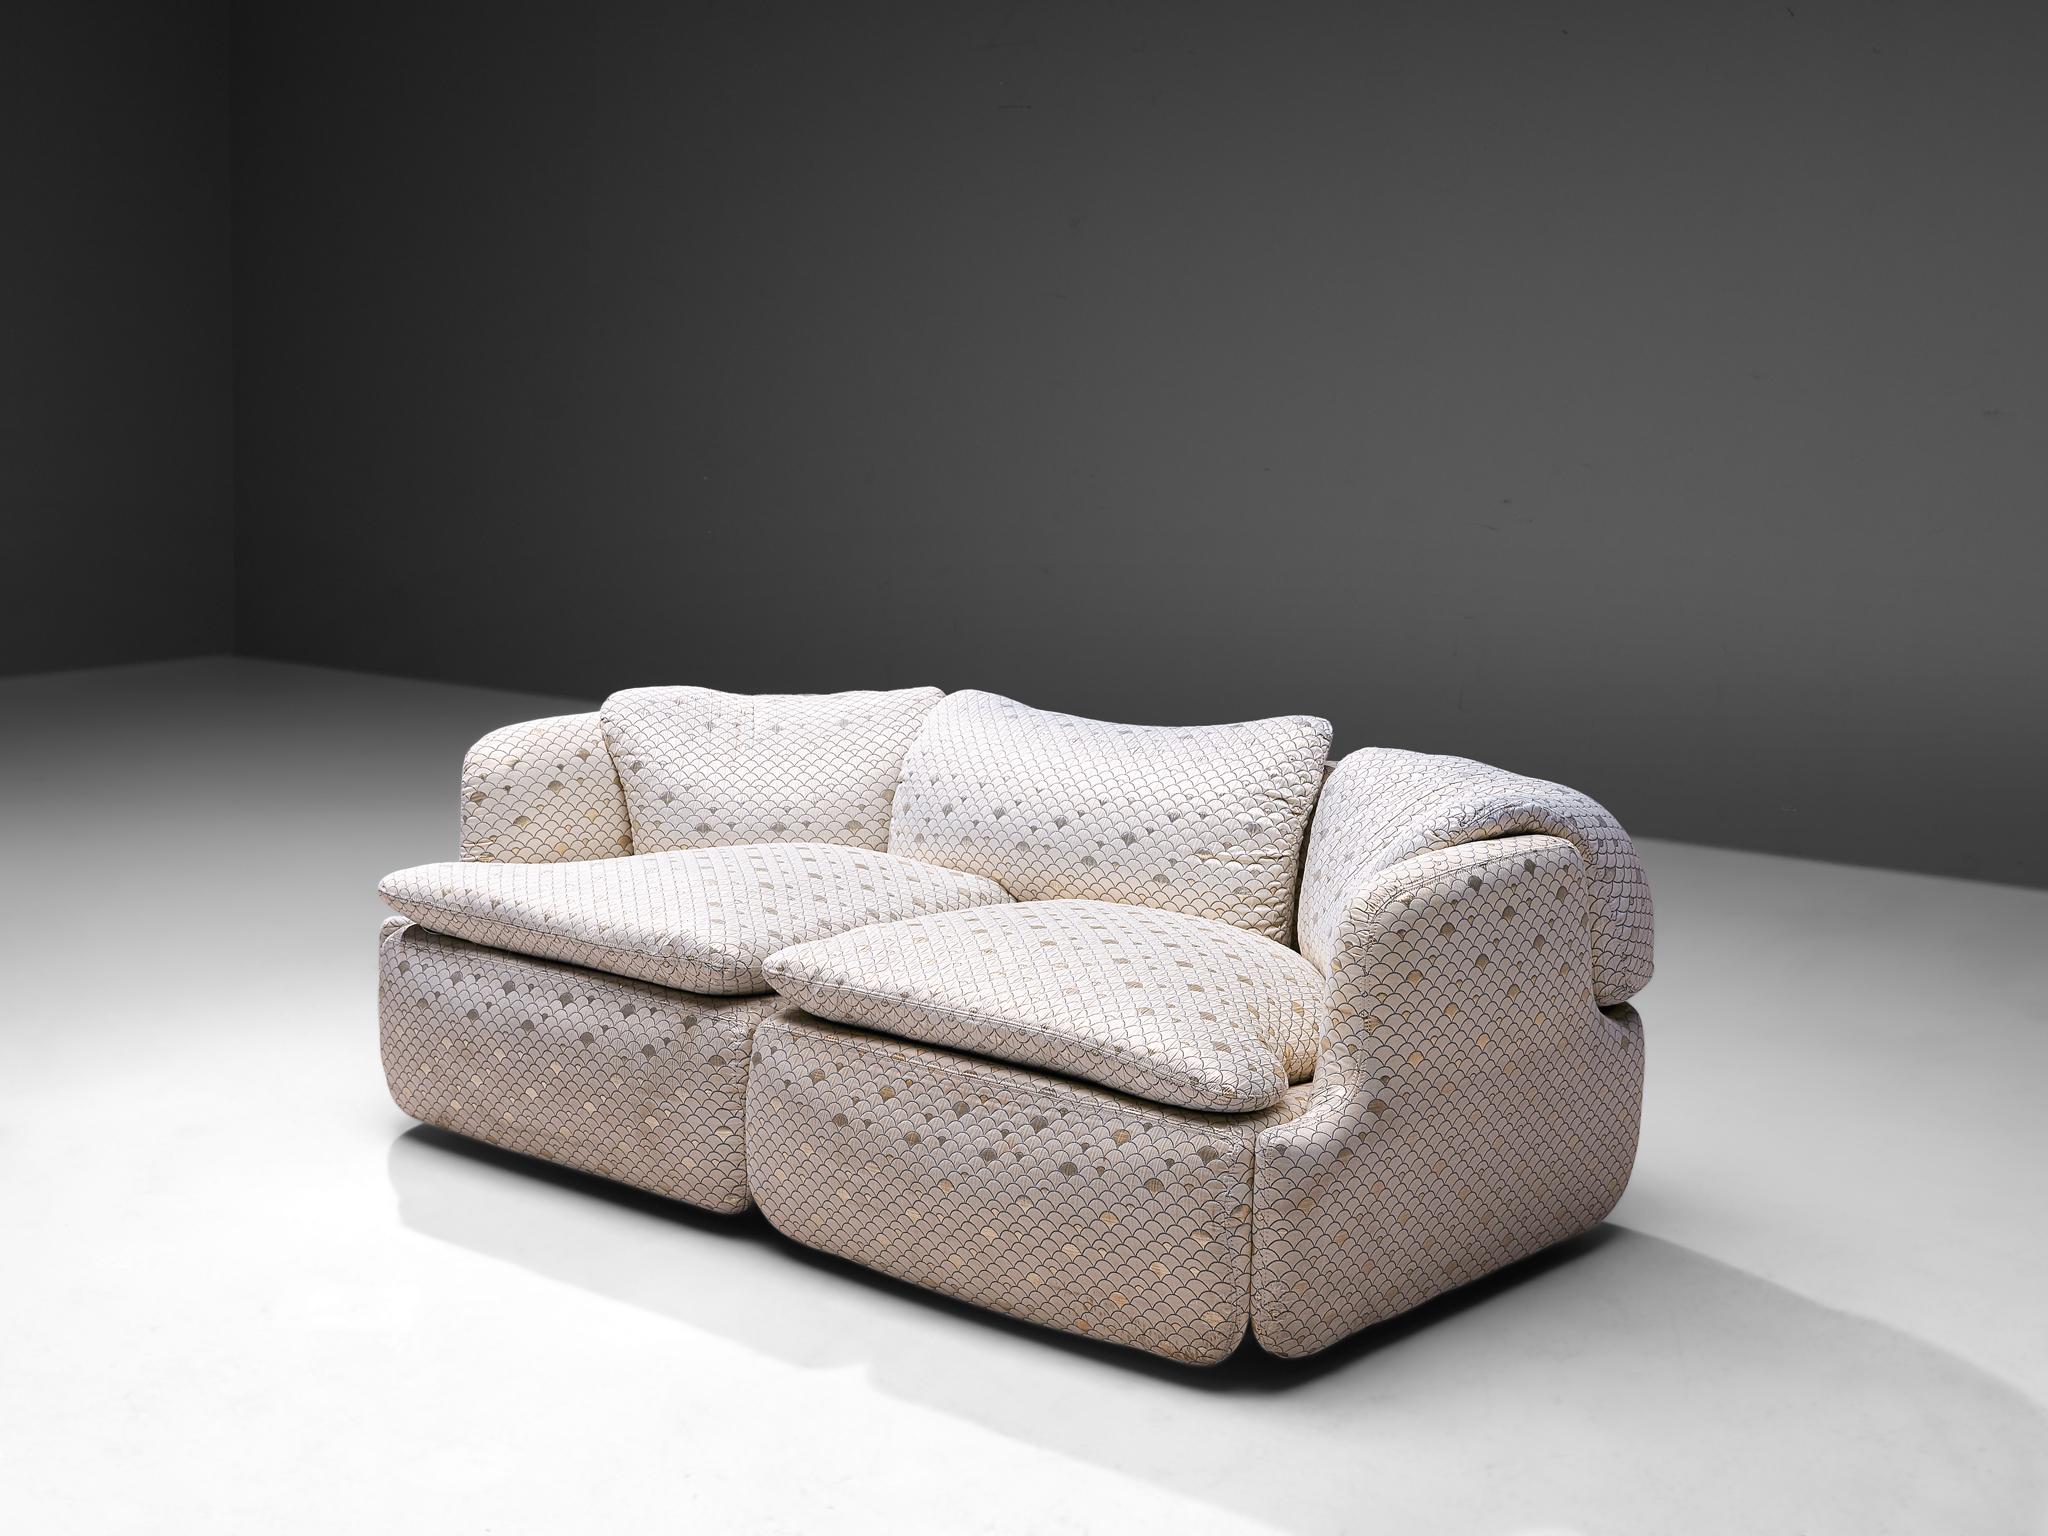 Alberto Rosselli for Saporiti, 'Confidential' sofa, in iridescent scale pattern upholstery, Italy, design 1972

Two-seat sofa designed by Italian architect Alberto Rosselli in 1972 for Saporiti Italia. The shiny white upholstery shows a scale-like